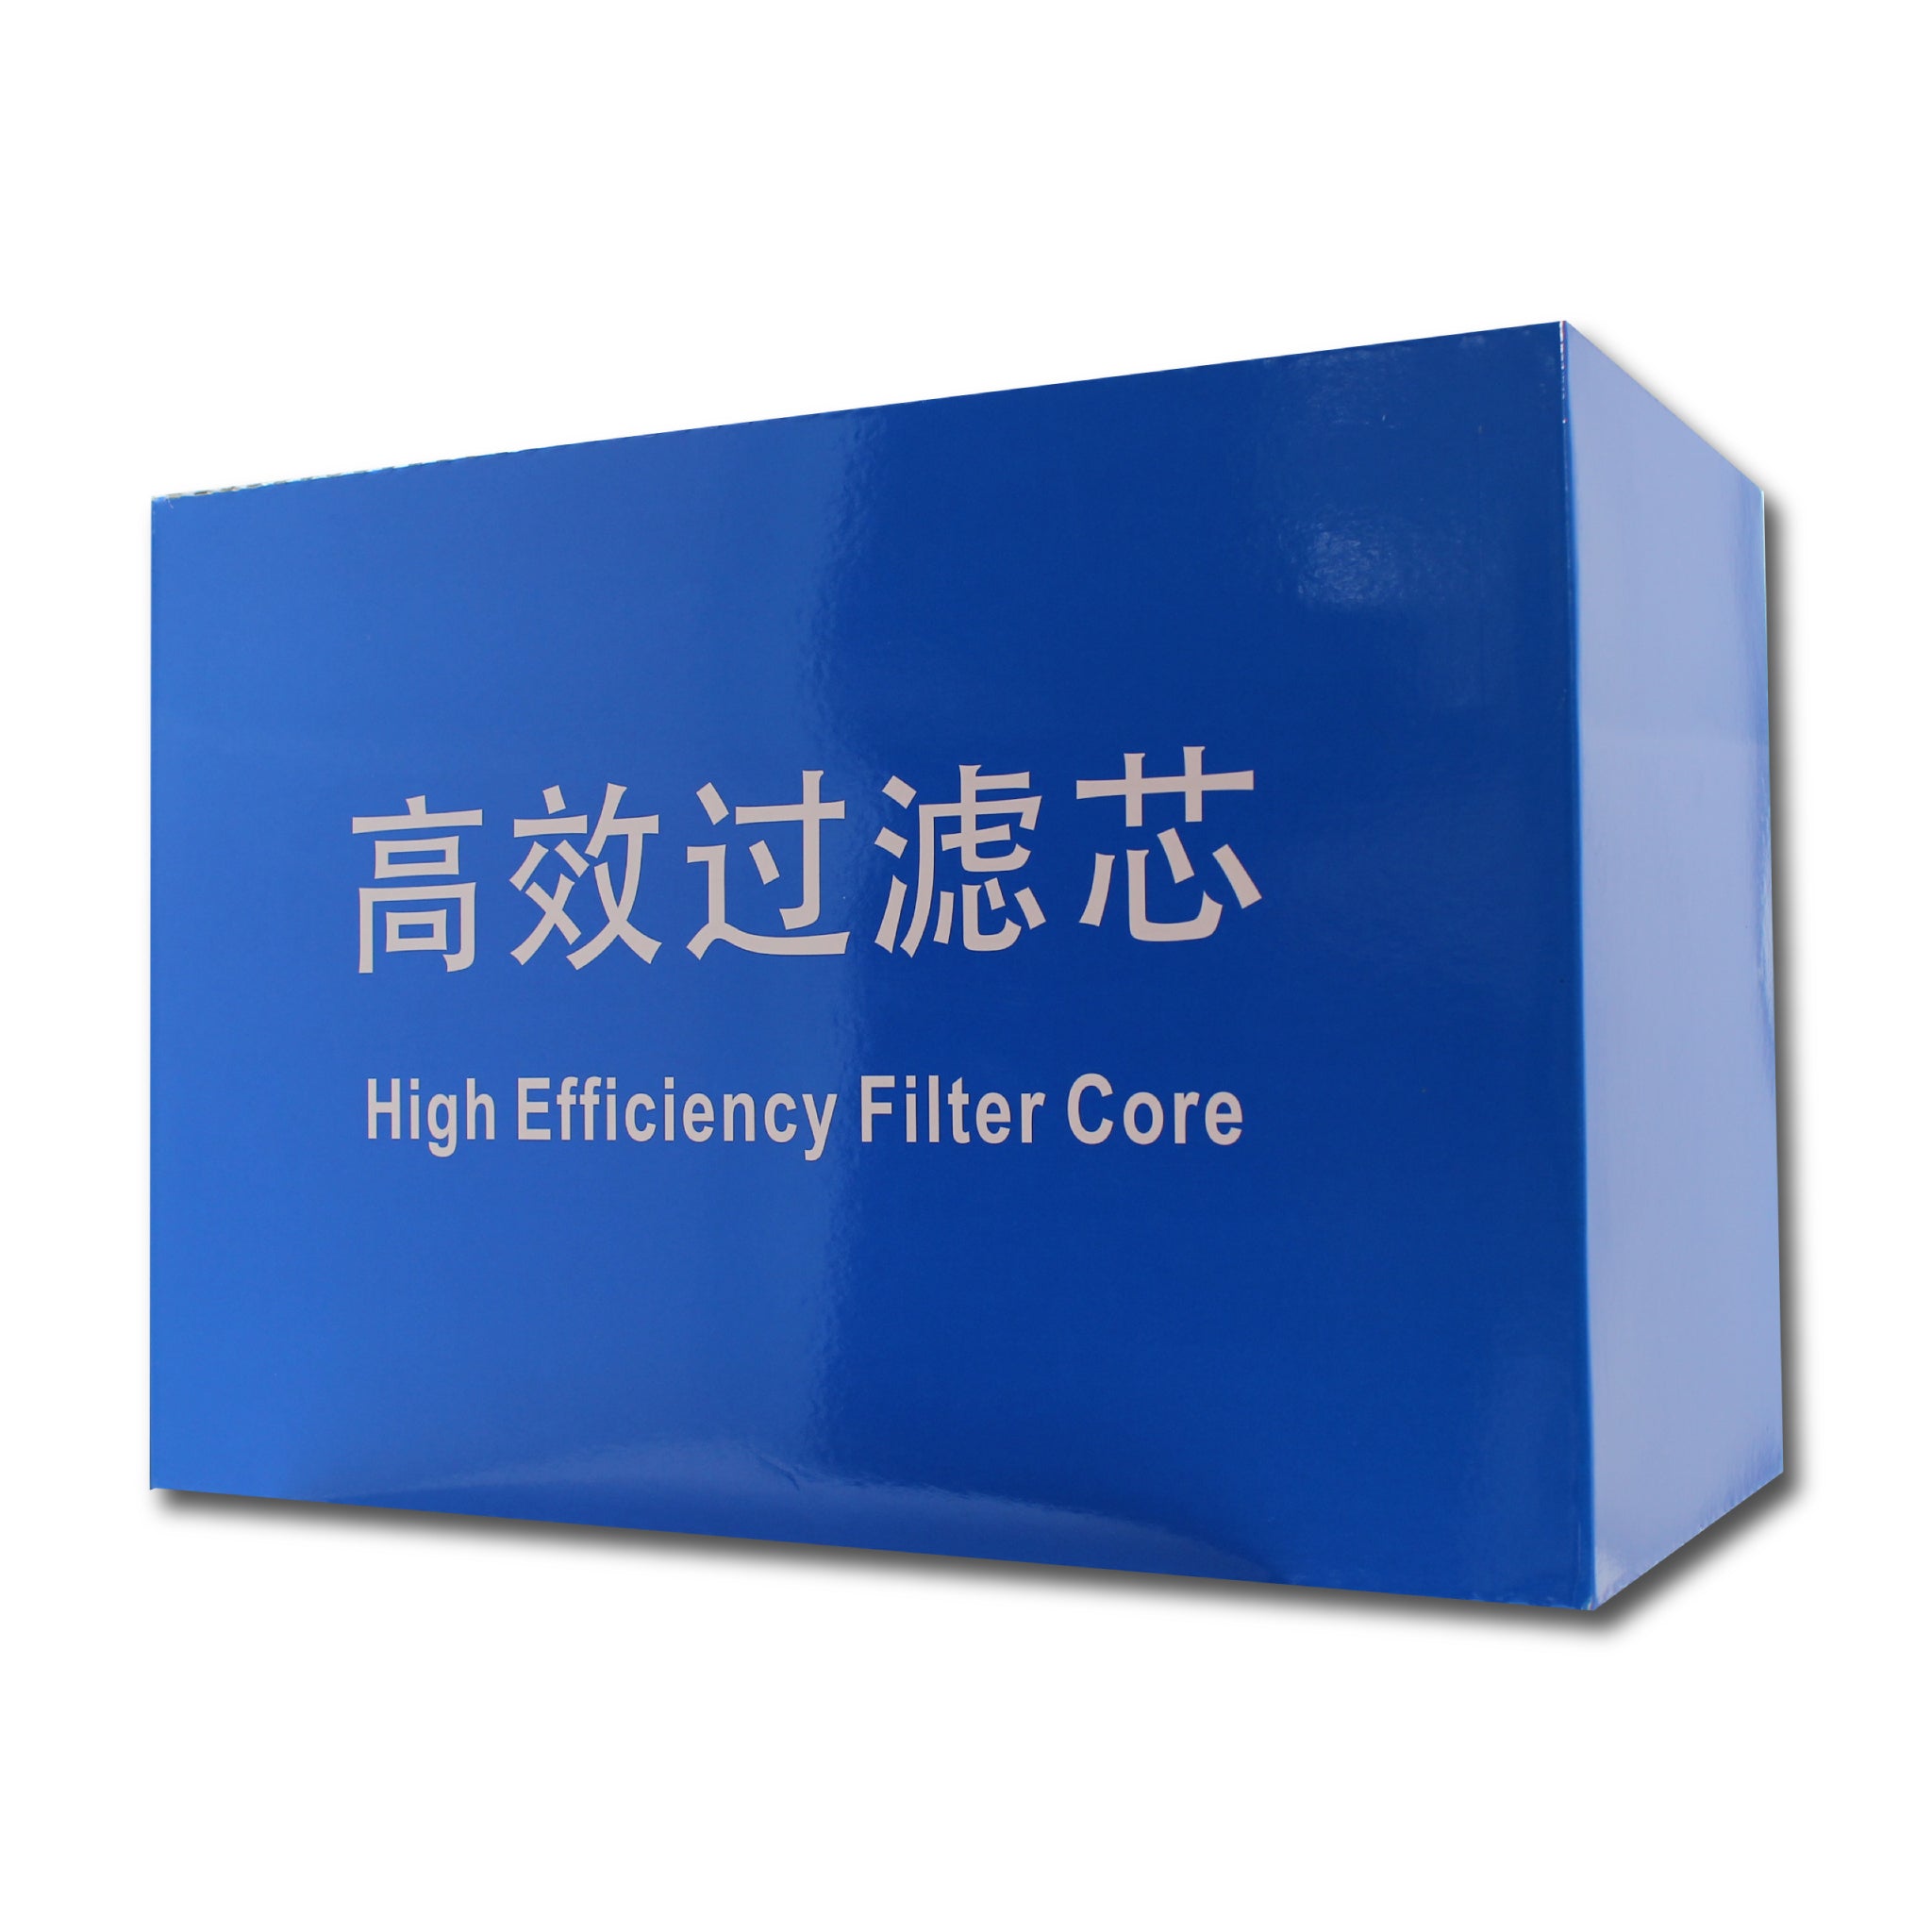 hepa filter angle for large air purifier